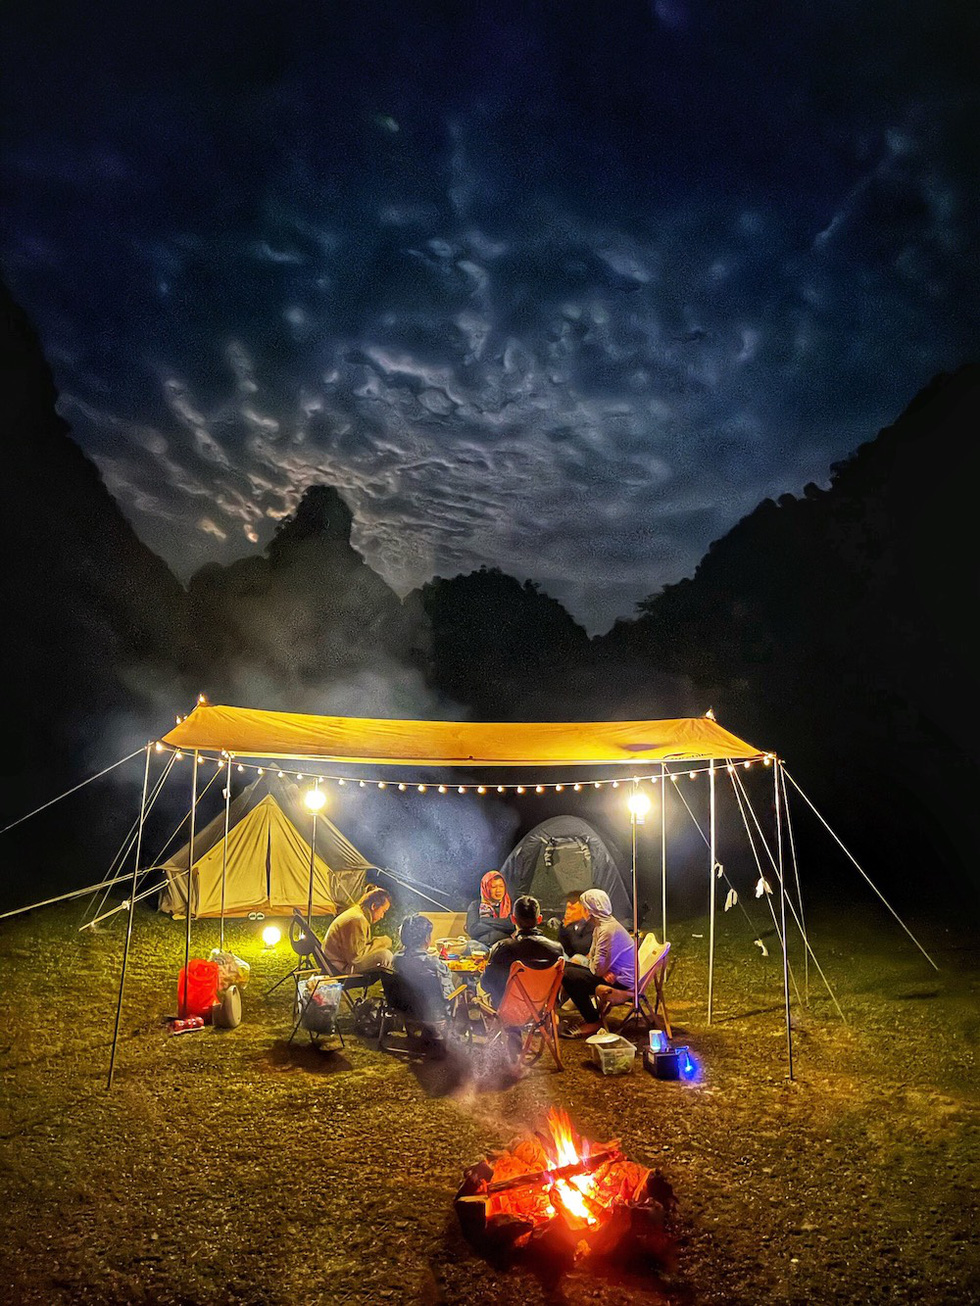 Visitors enjoy a campfire near Mat Than Mountain in Cao Bang Province, northern Vietnam. Photo: Ly Dao Huy / Tuoi Tre